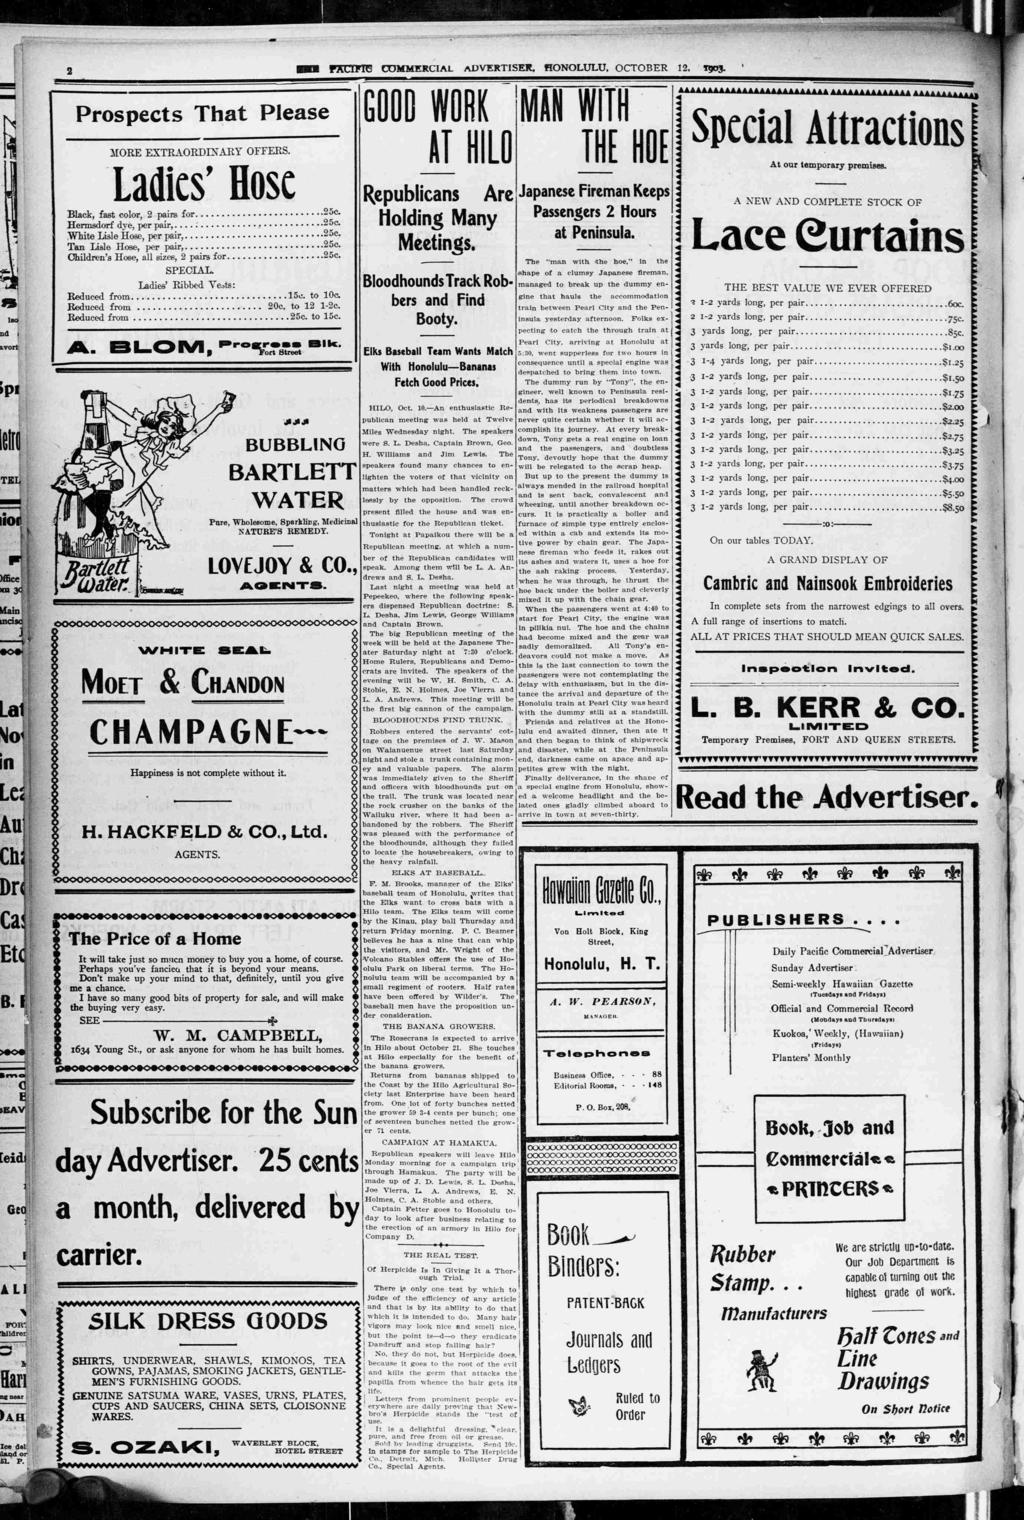 f AL'FUS COMMERCAL ADVERTSER, HONOLULU. OCTOBER 2, T93. Prospects That Please MORE EXTRAORDNARY OFFERS. Lades' Hose Black, fast color, 2 pars for 25c Hermsdorf dye, per par,.... :?